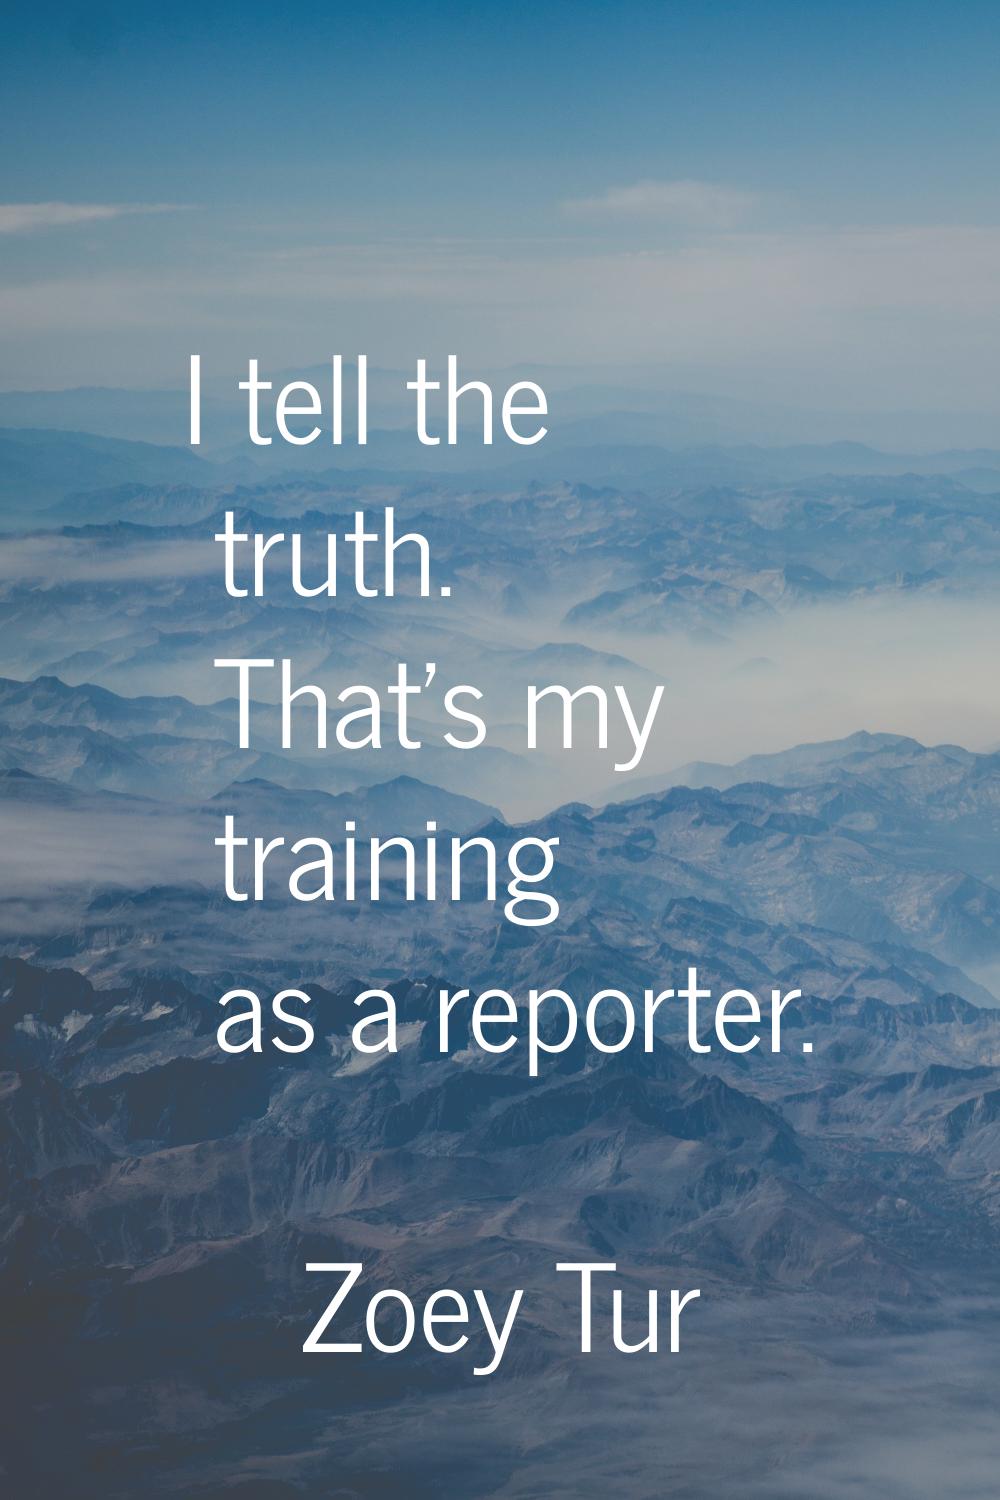 I tell the truth. That's my training as a reporter.